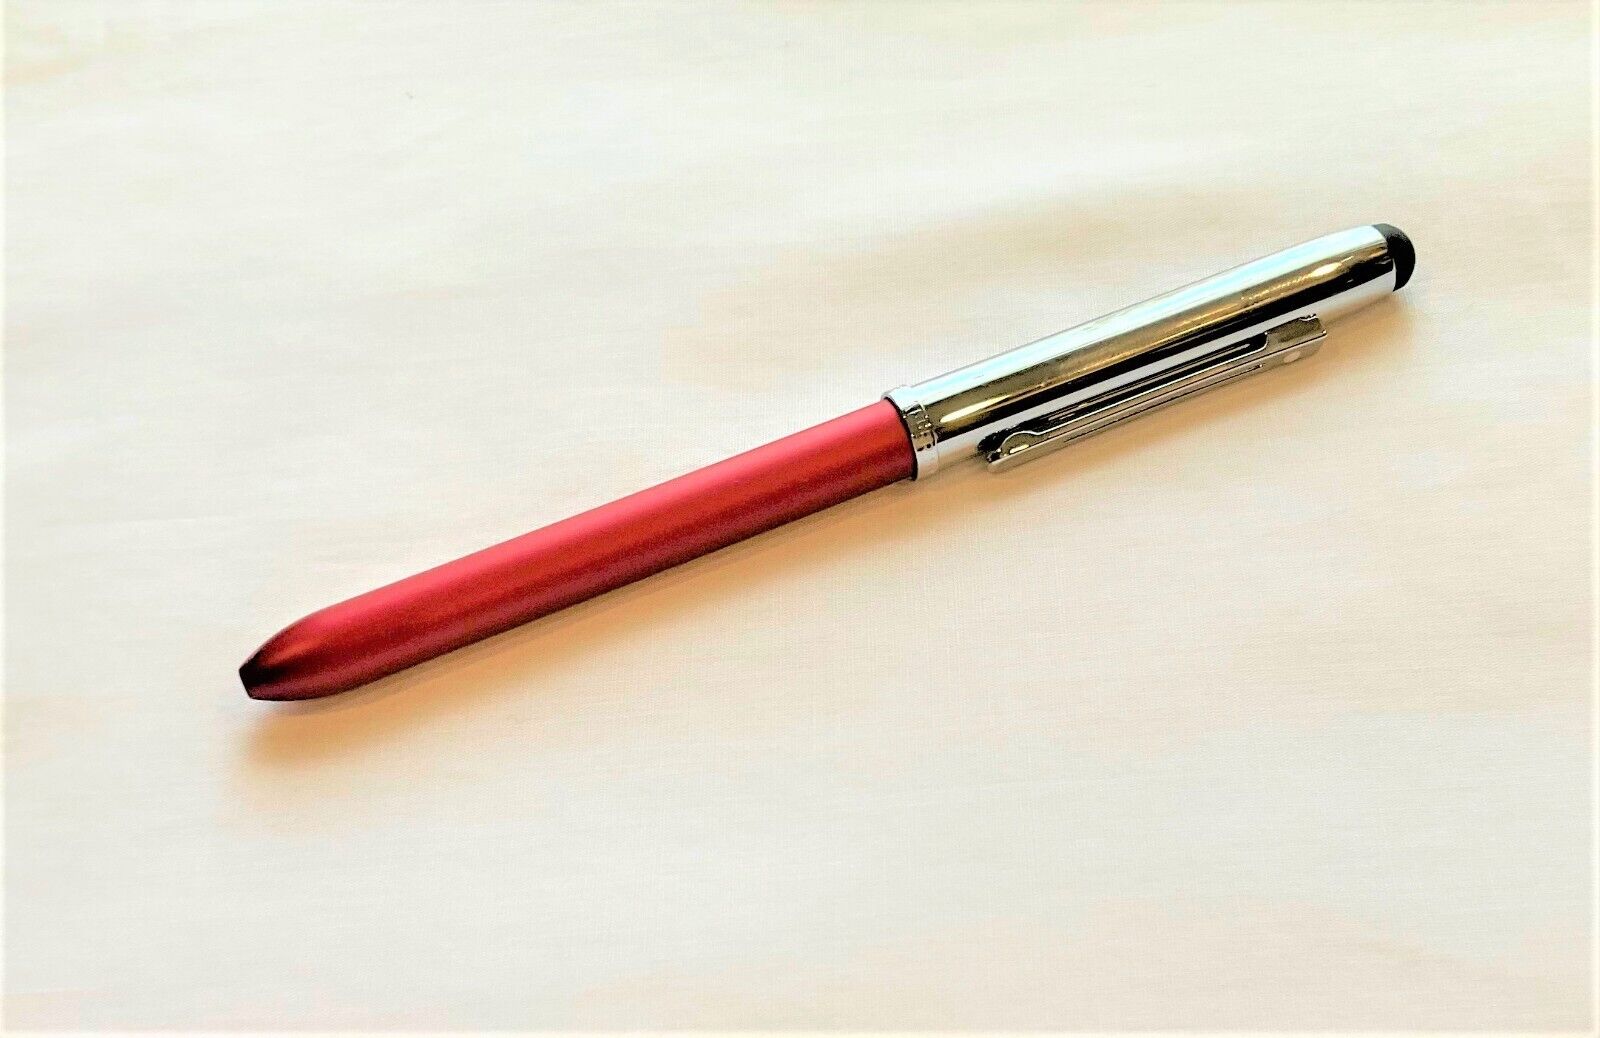 New Sheaffer Multi-Functional Pen - Quattro- Chrome and Red, with Box